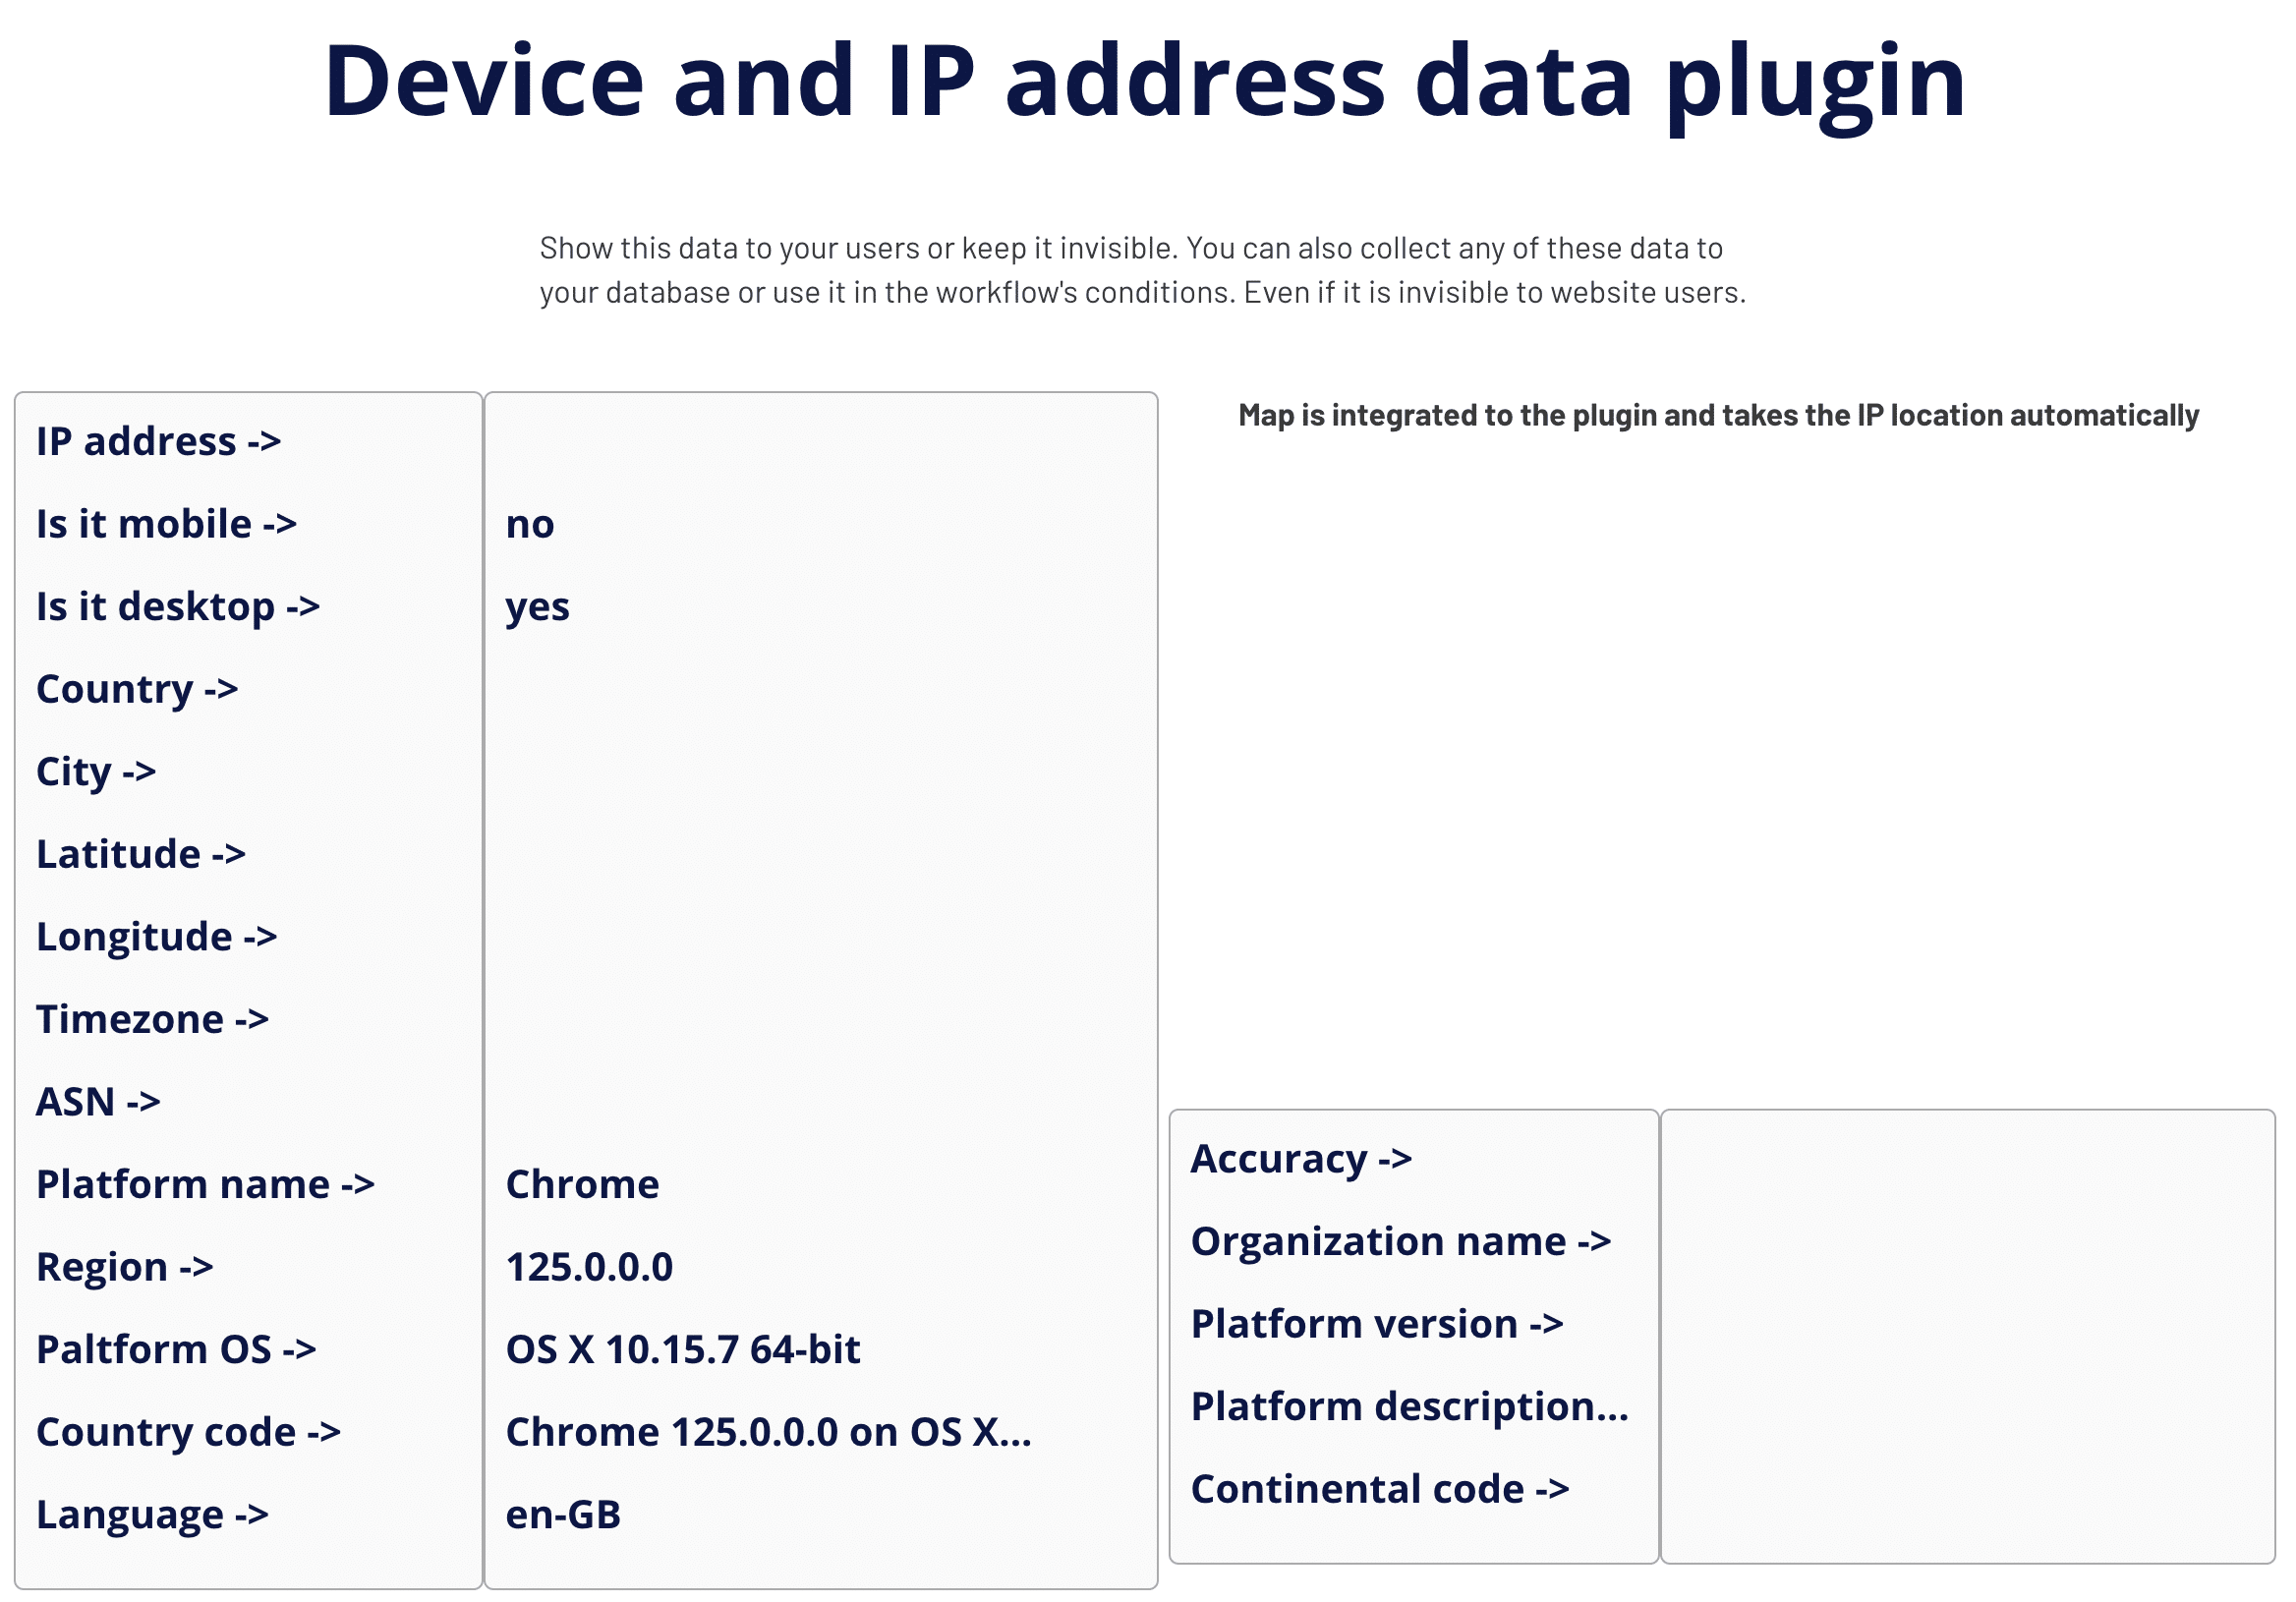 Device and IP Address Data + Map